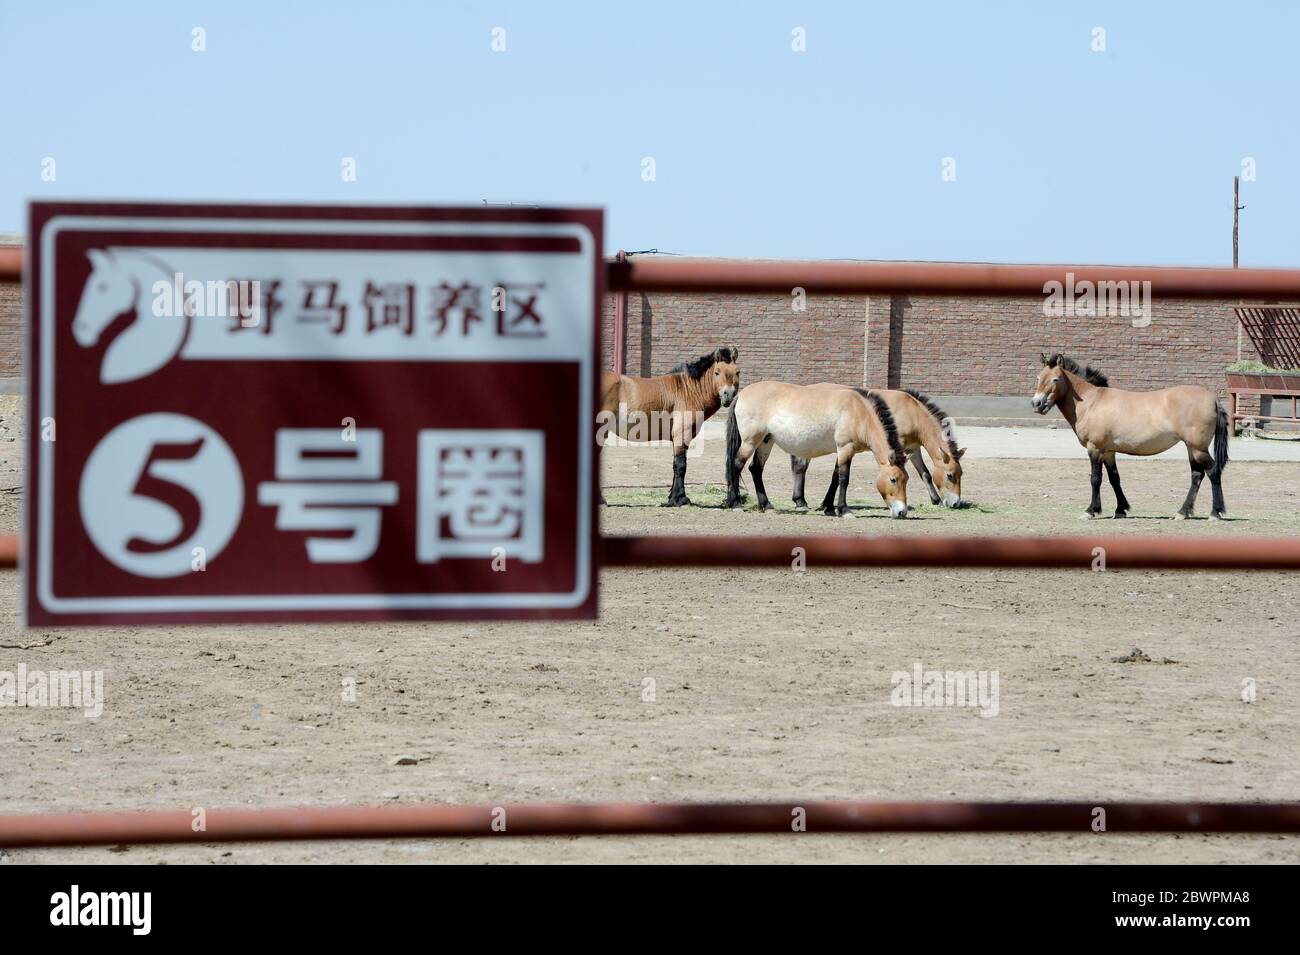 (200603) -- CHANGJI, June 3, 2020 (Xinhua) -- Przewalski's horses are seen at the Xinjiang Wild Horse Breeding and Research Center in Changji Hui Autonomous Prefecture, northwest China's Xinjiang Uygur Autonomous Region, June 2, 2020. Przewalski's horses are the only surviving horse subspecies which has never been domesticated. In China, they are mainly found in Xinjiang's Junggar Basin. Researchers at the Xinjiang Wild Horse Breeding and Research Center have applied multiple adjustments to the horse populations in order to avoid close inbreeding and achieve better preservation of the hors Stock Photo